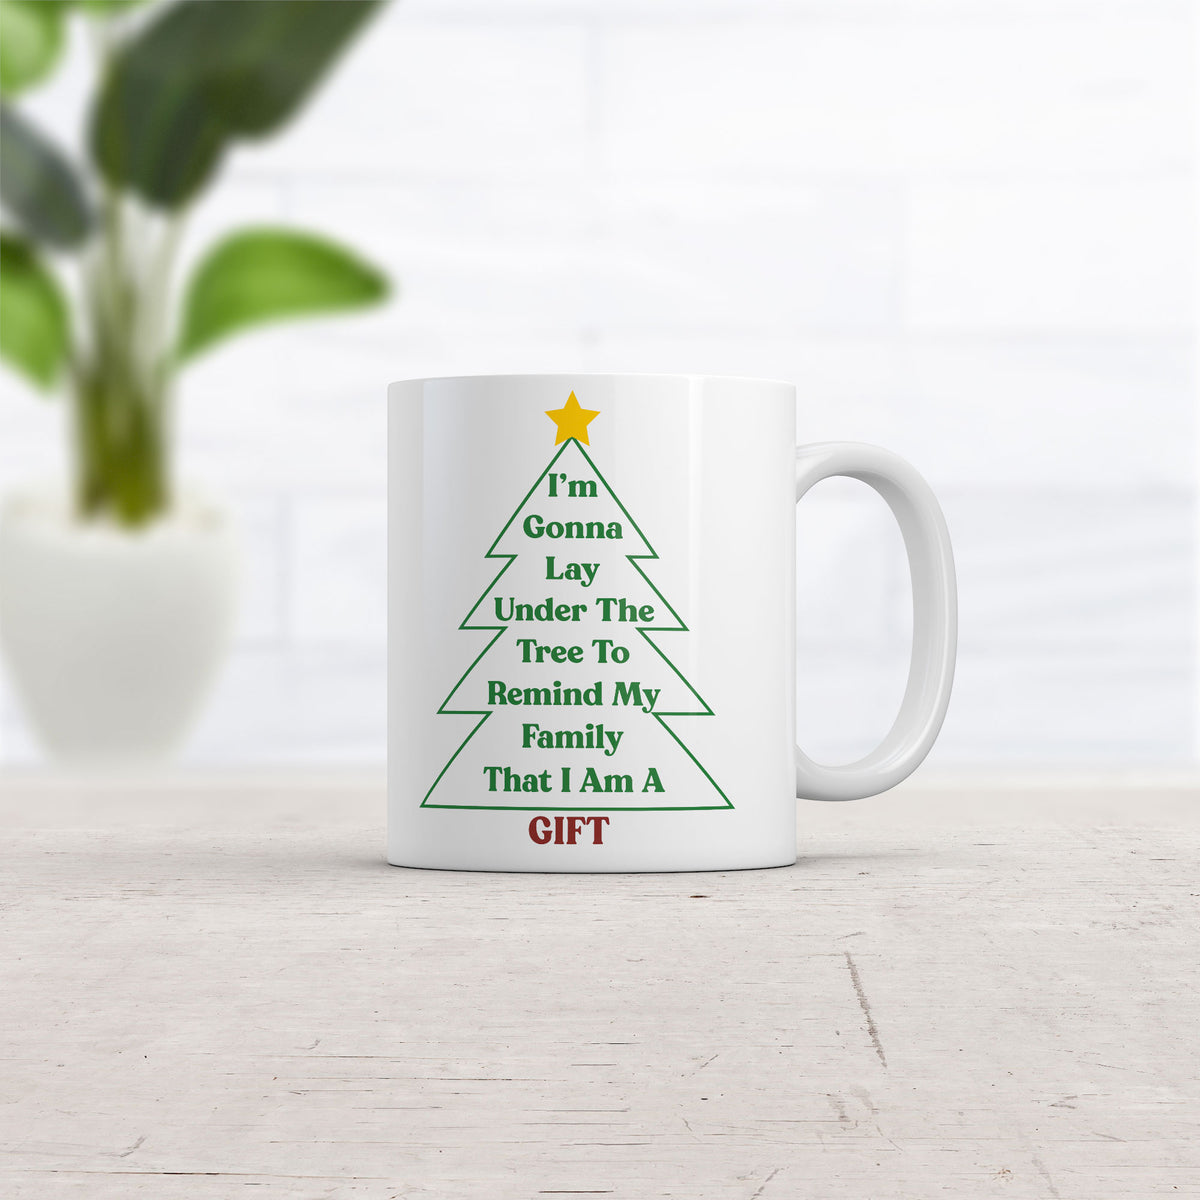 Im Gonna Lay Under The Tree To Remind My Family That I Am A Gift Mug